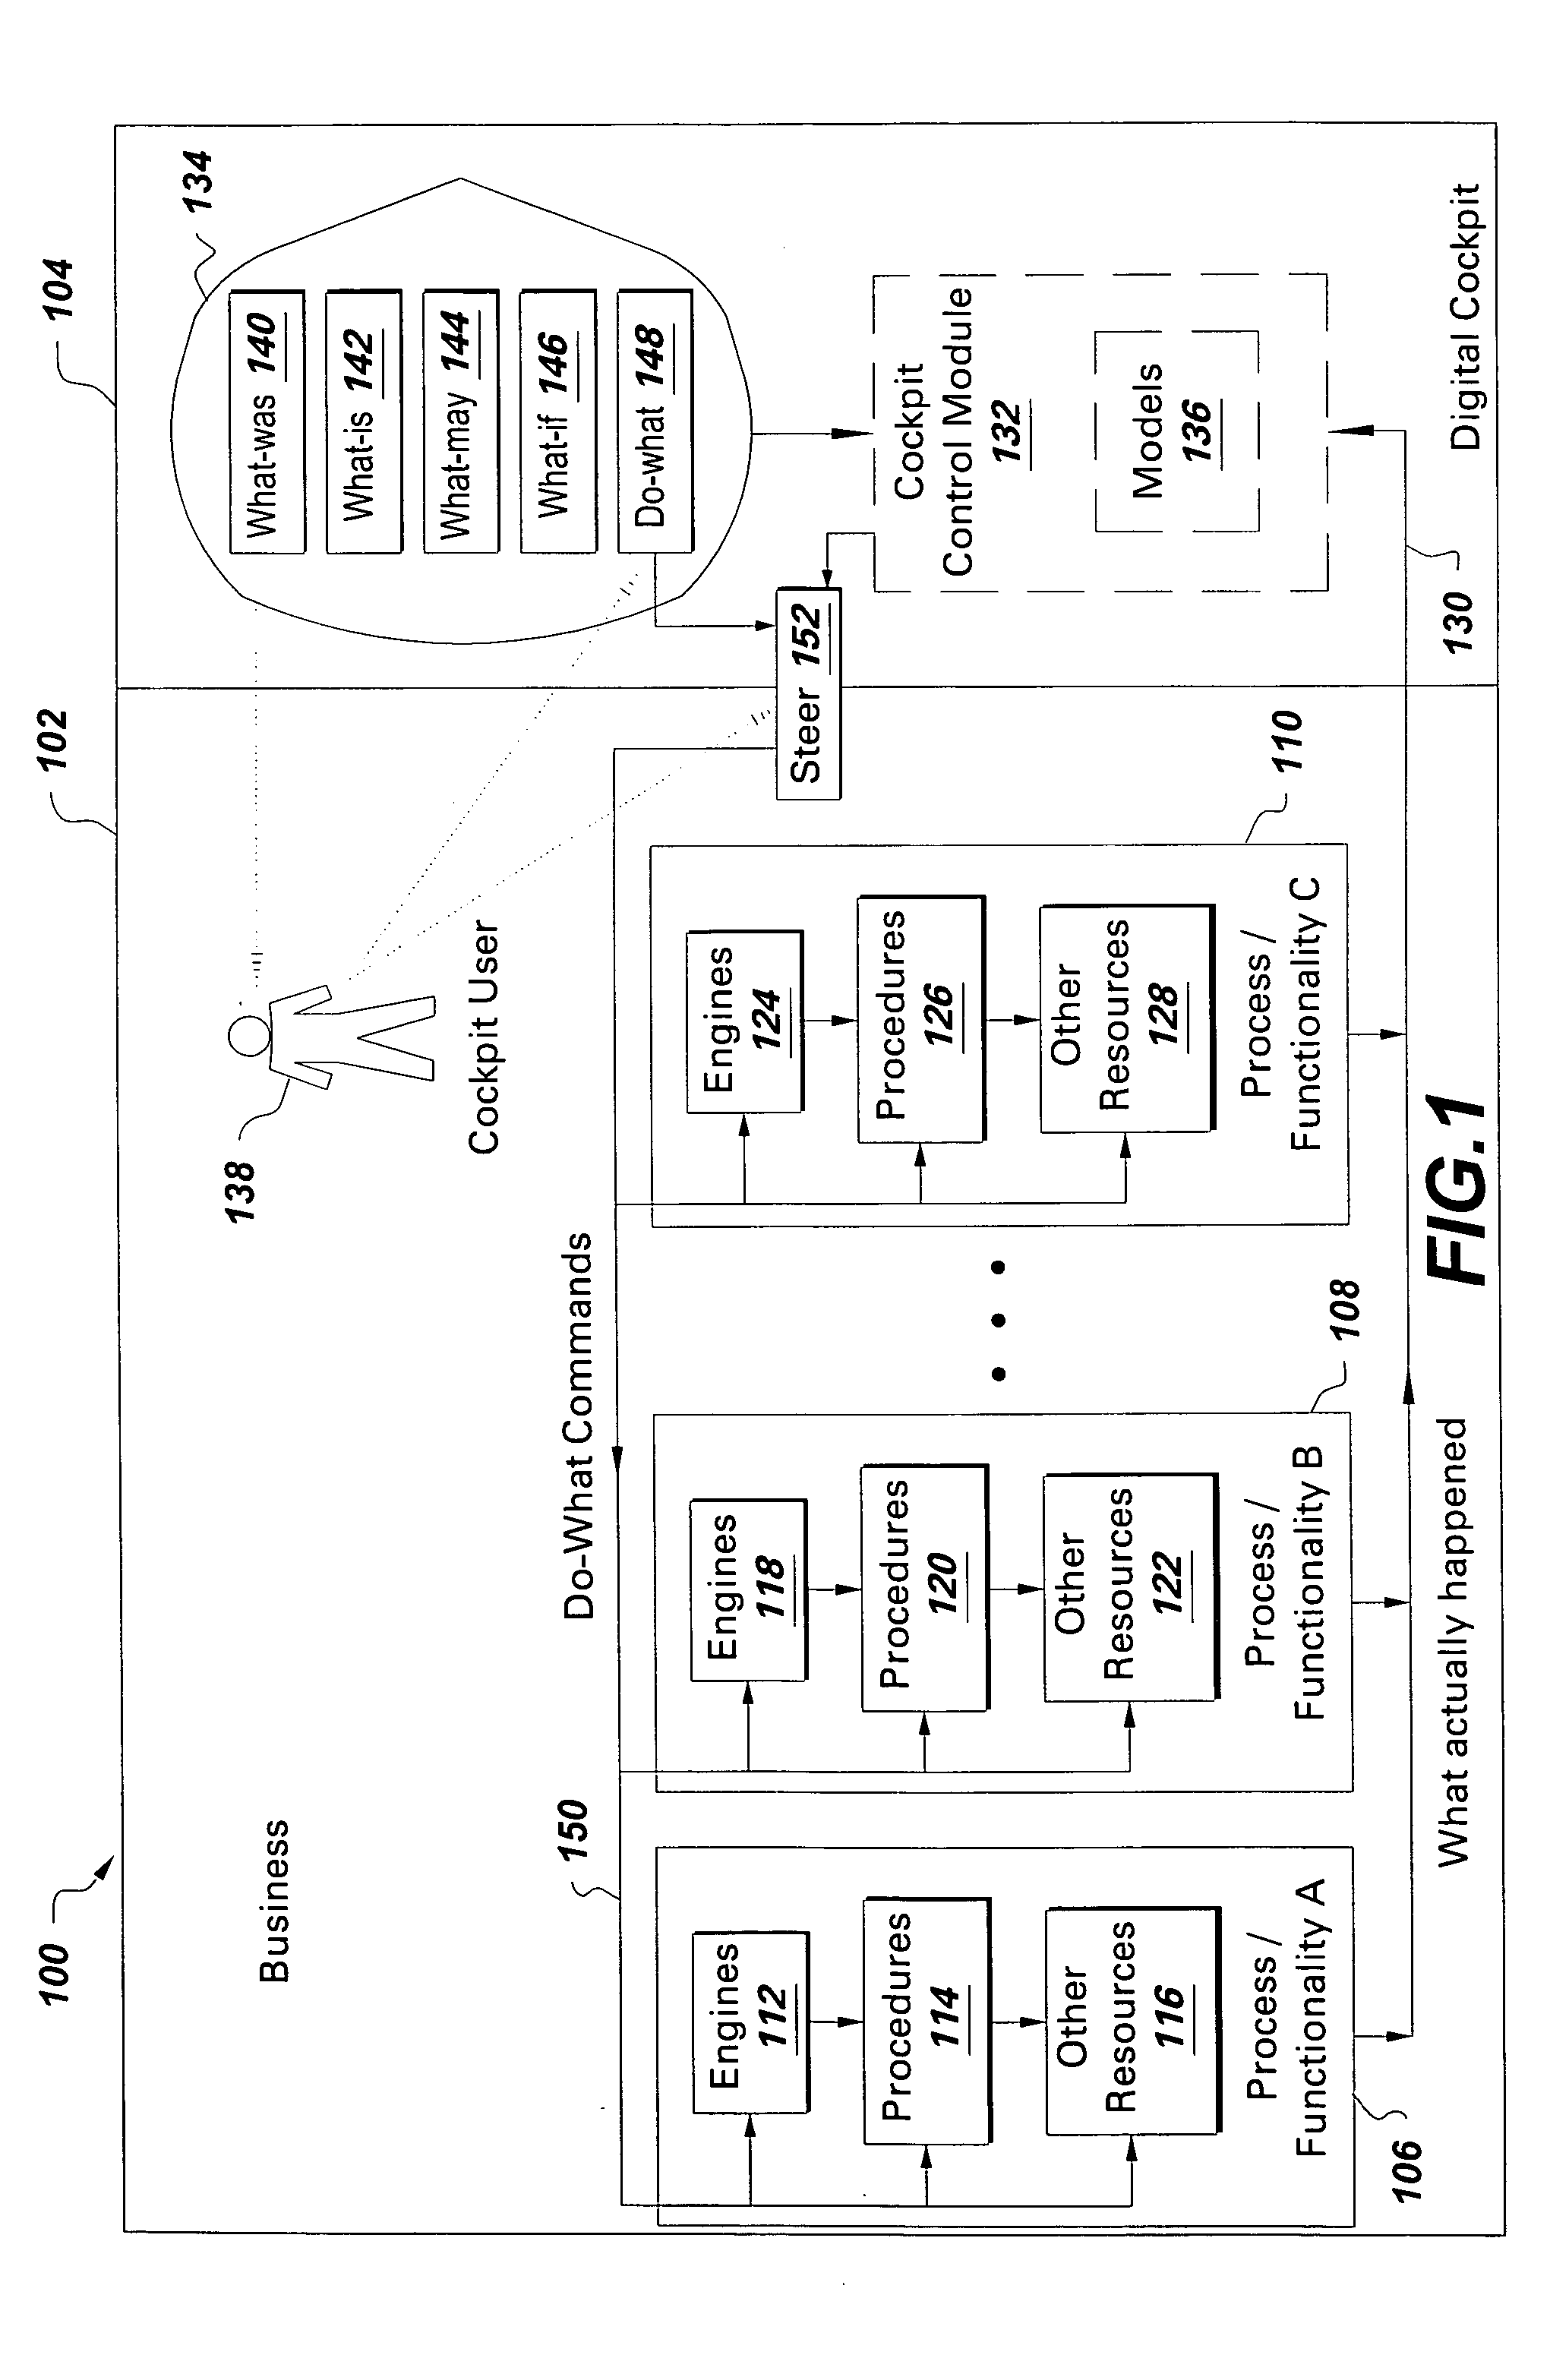 Method for the use of and interaction with business system transfer functions